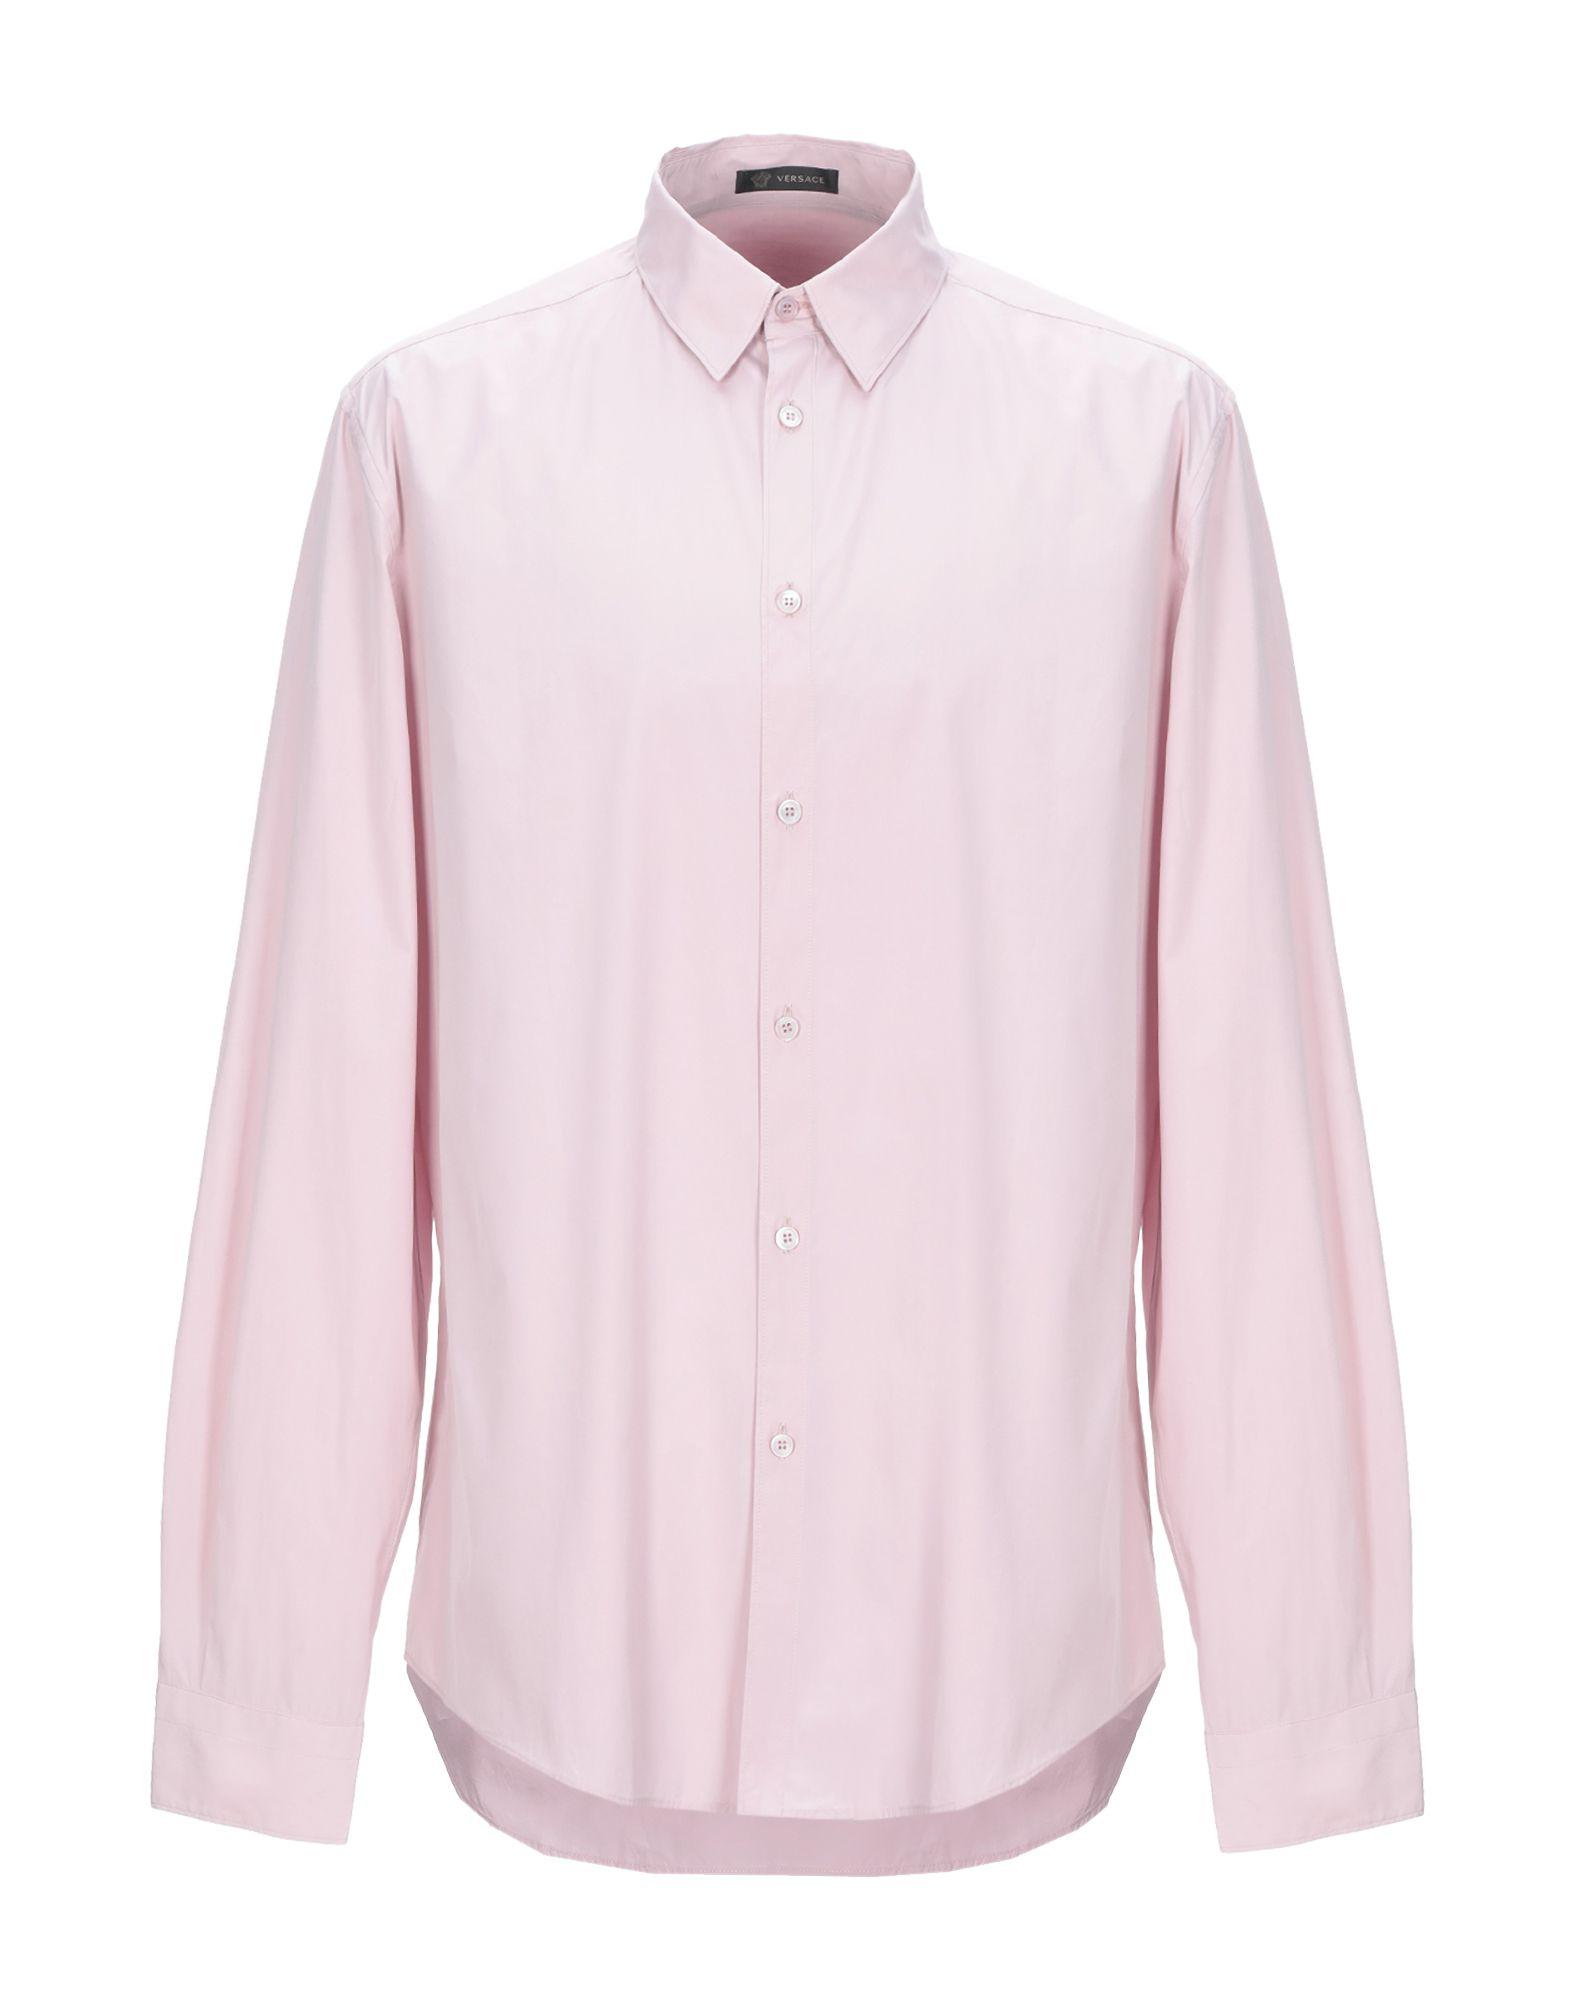 Versace Cotton Shirt in Pink for Men - Lyst